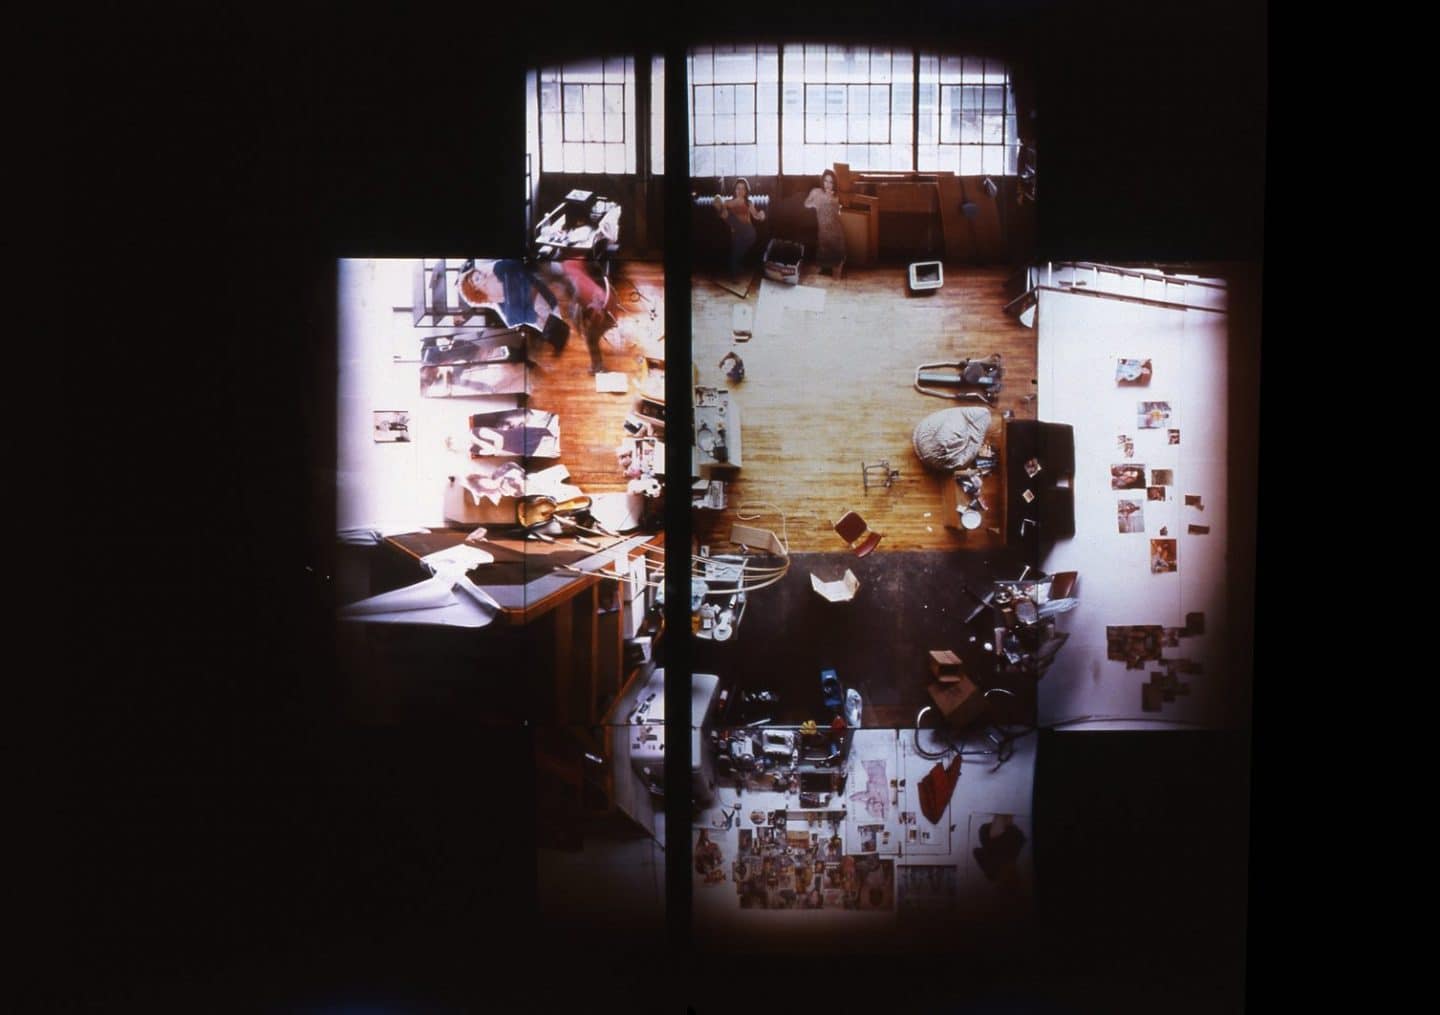 Adrian Blackwell, Kate McConnal’s Space, #1 from Evicted May 1, 2000 (9 Hanna Ave.), 2001, colour photograph. Purchase, Canada Council for the Arts Acquisition Assistance Program and Chancellor Richardson Memorial Fund, 2002 (45-004.01a-b)